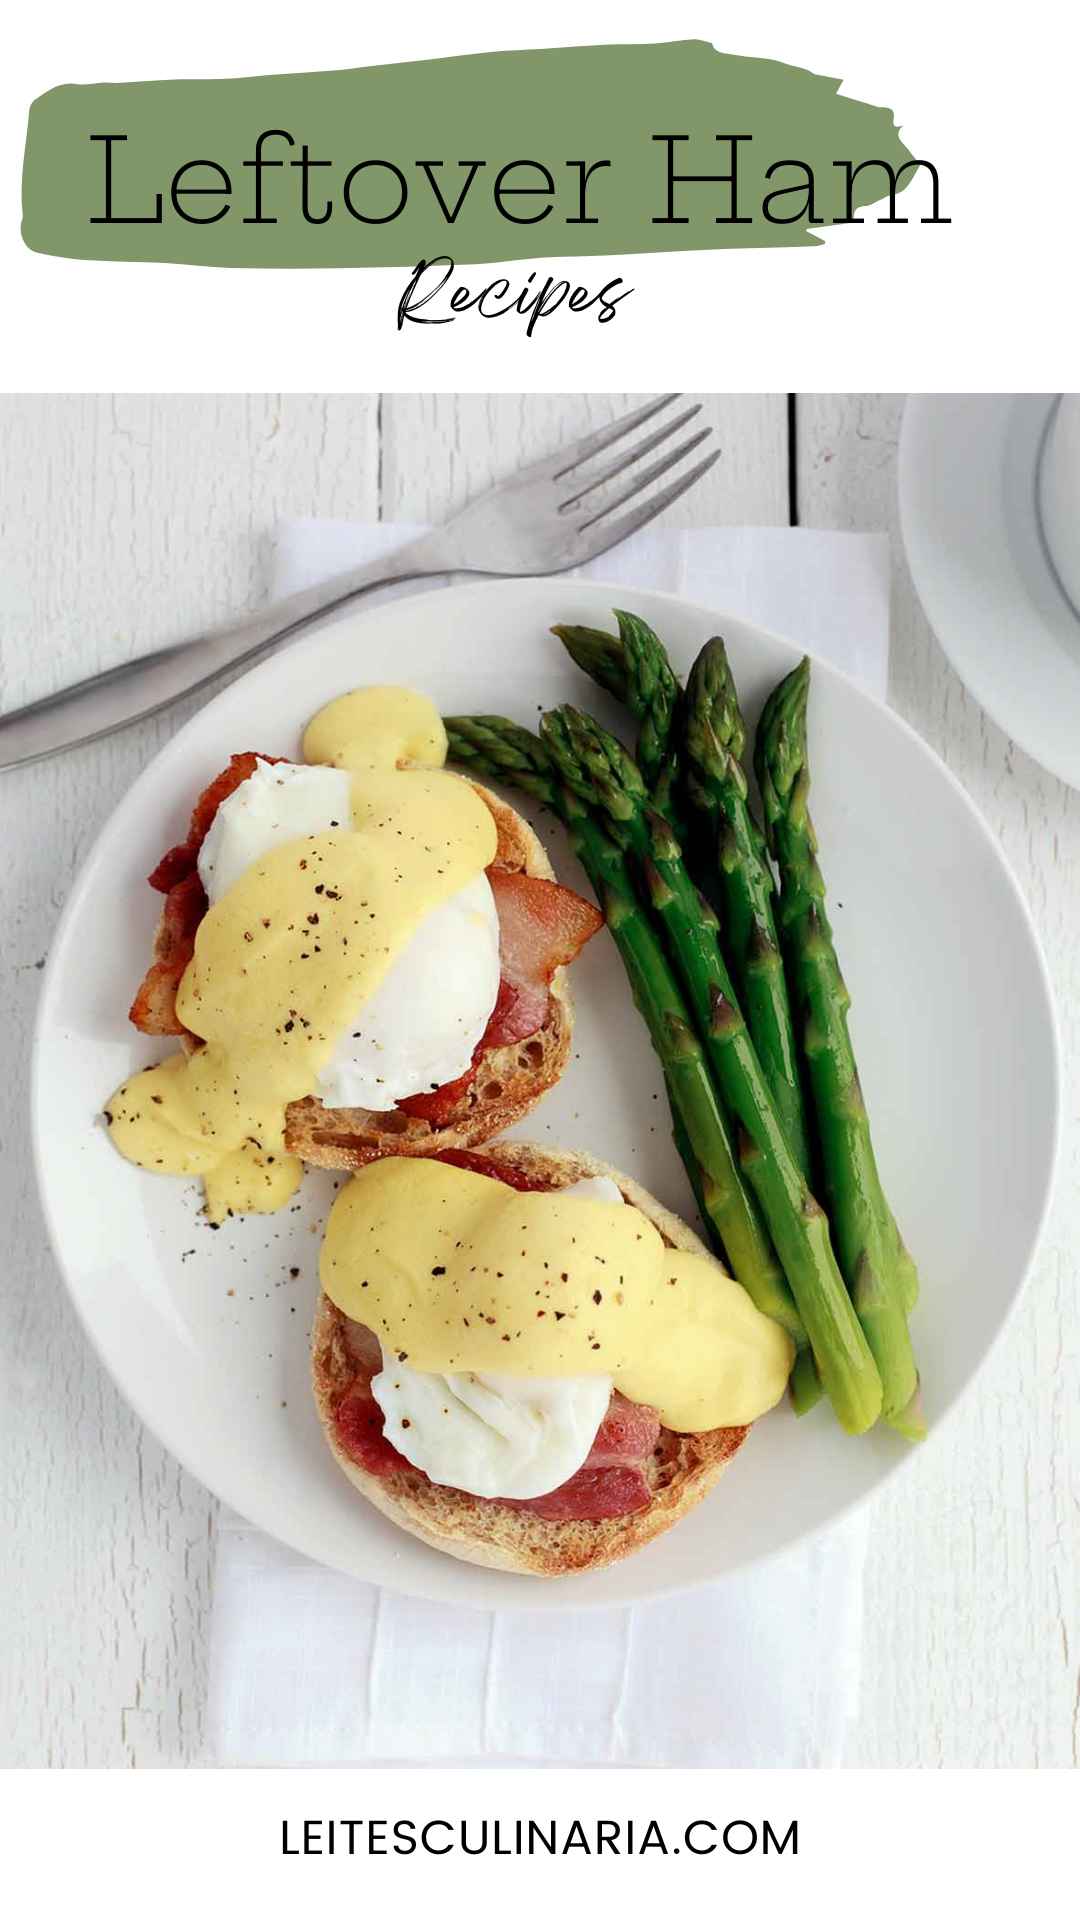 Two eggs Benedict topped with Hollandaise with asparagus on the side.